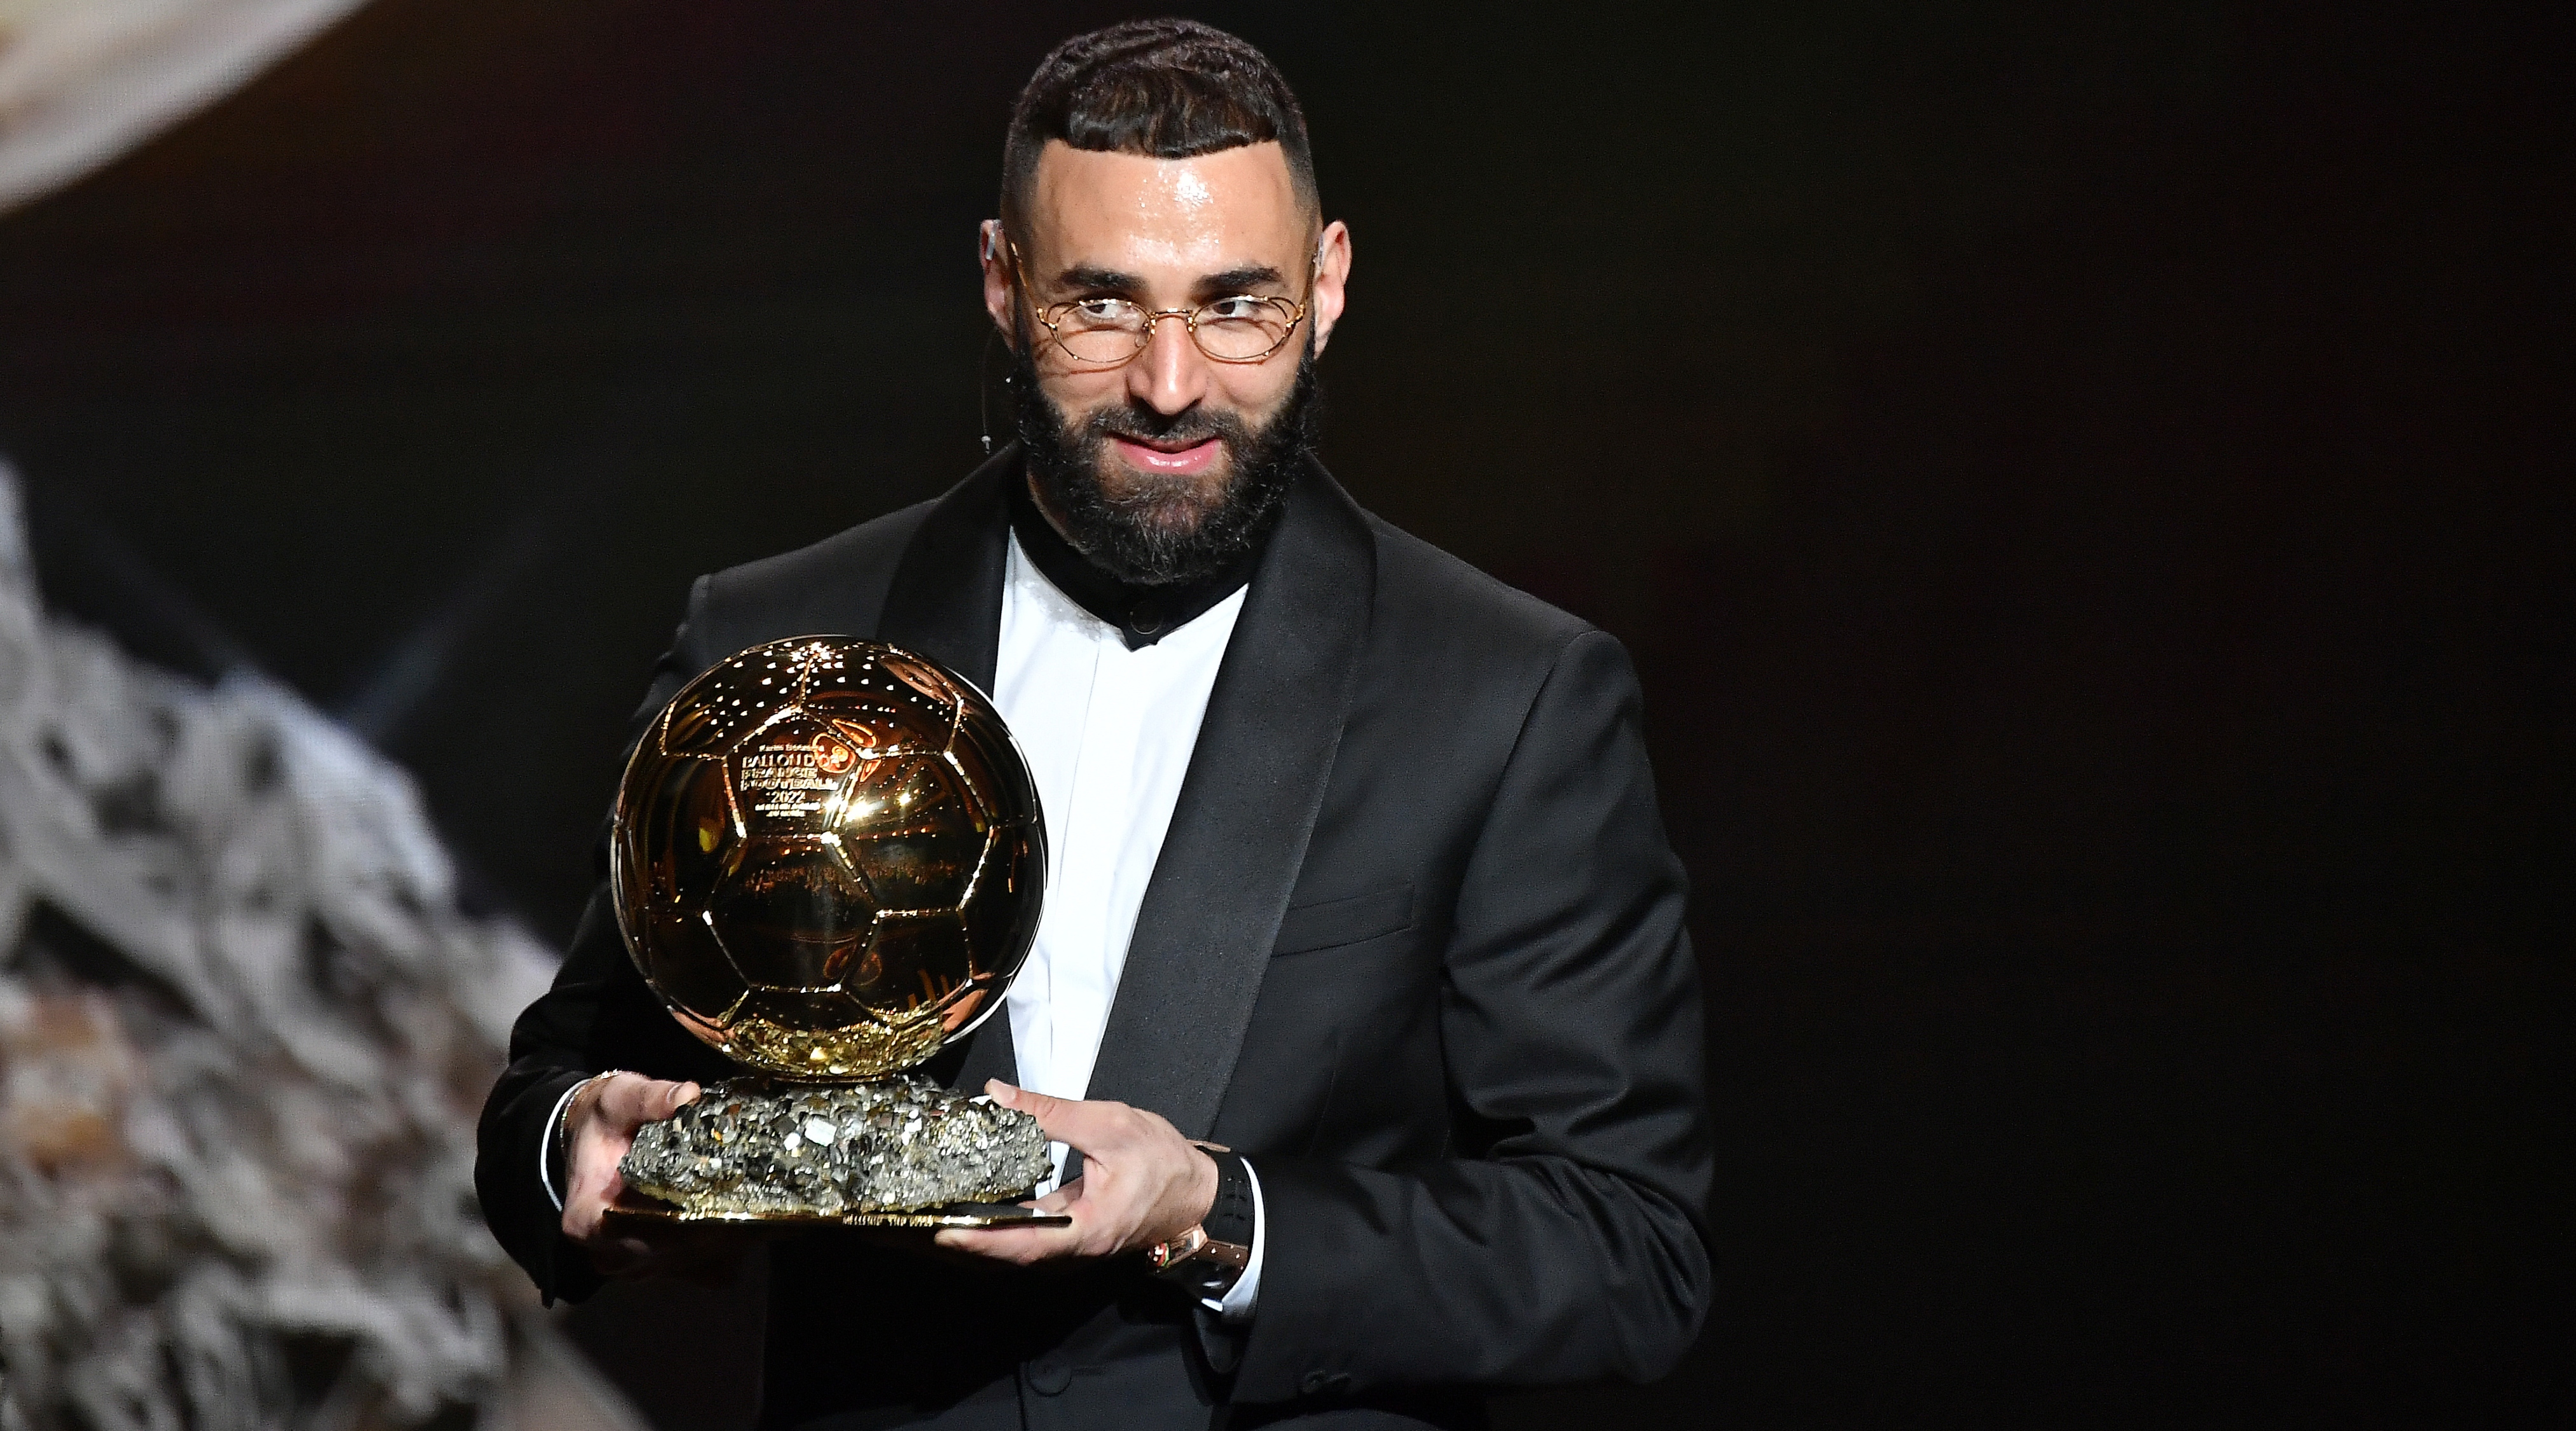 Karim Benzema holds the Ballon d'Or trophy after being announced as the winner of the 2023 Ballon d'Or on 17 October, 2022